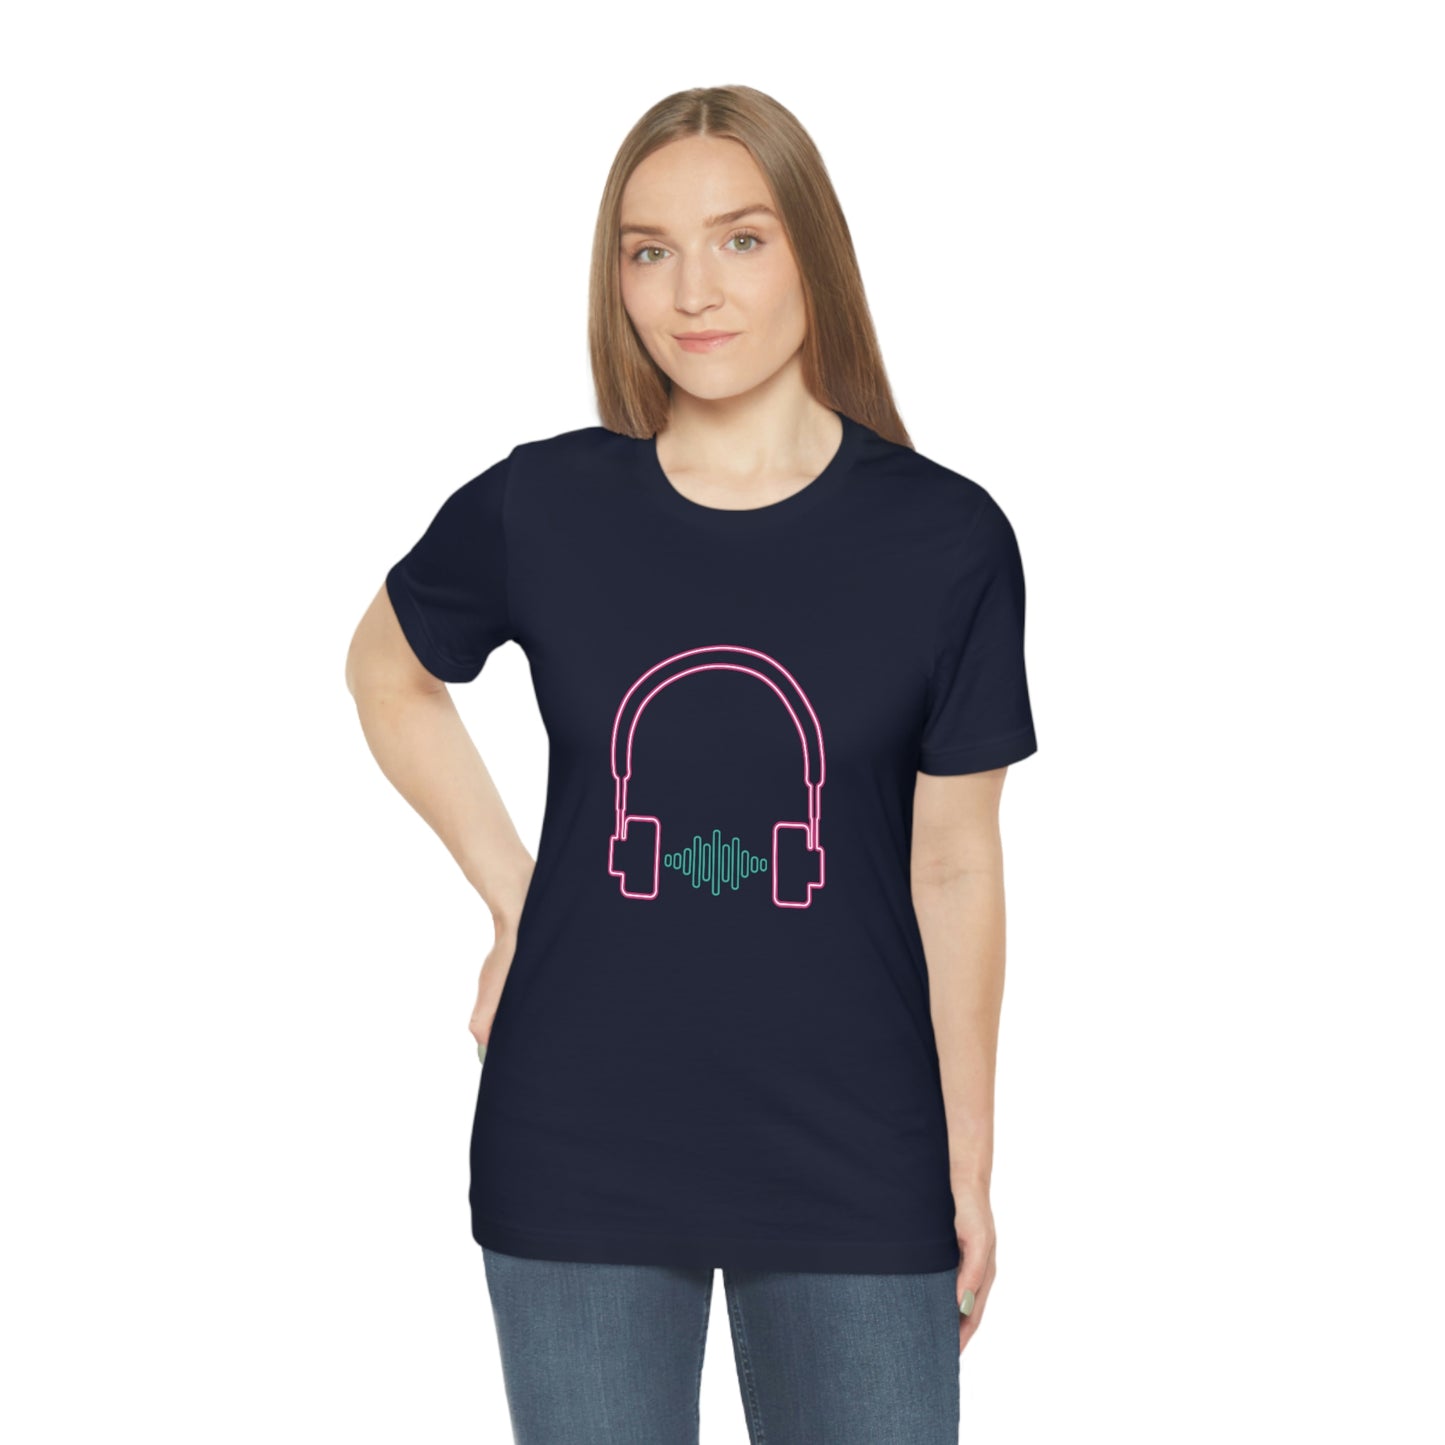 Navy T-Shirt featuring a vibrant neon design of hot pink and green audio headphones from the TEQNEON Music Box collection